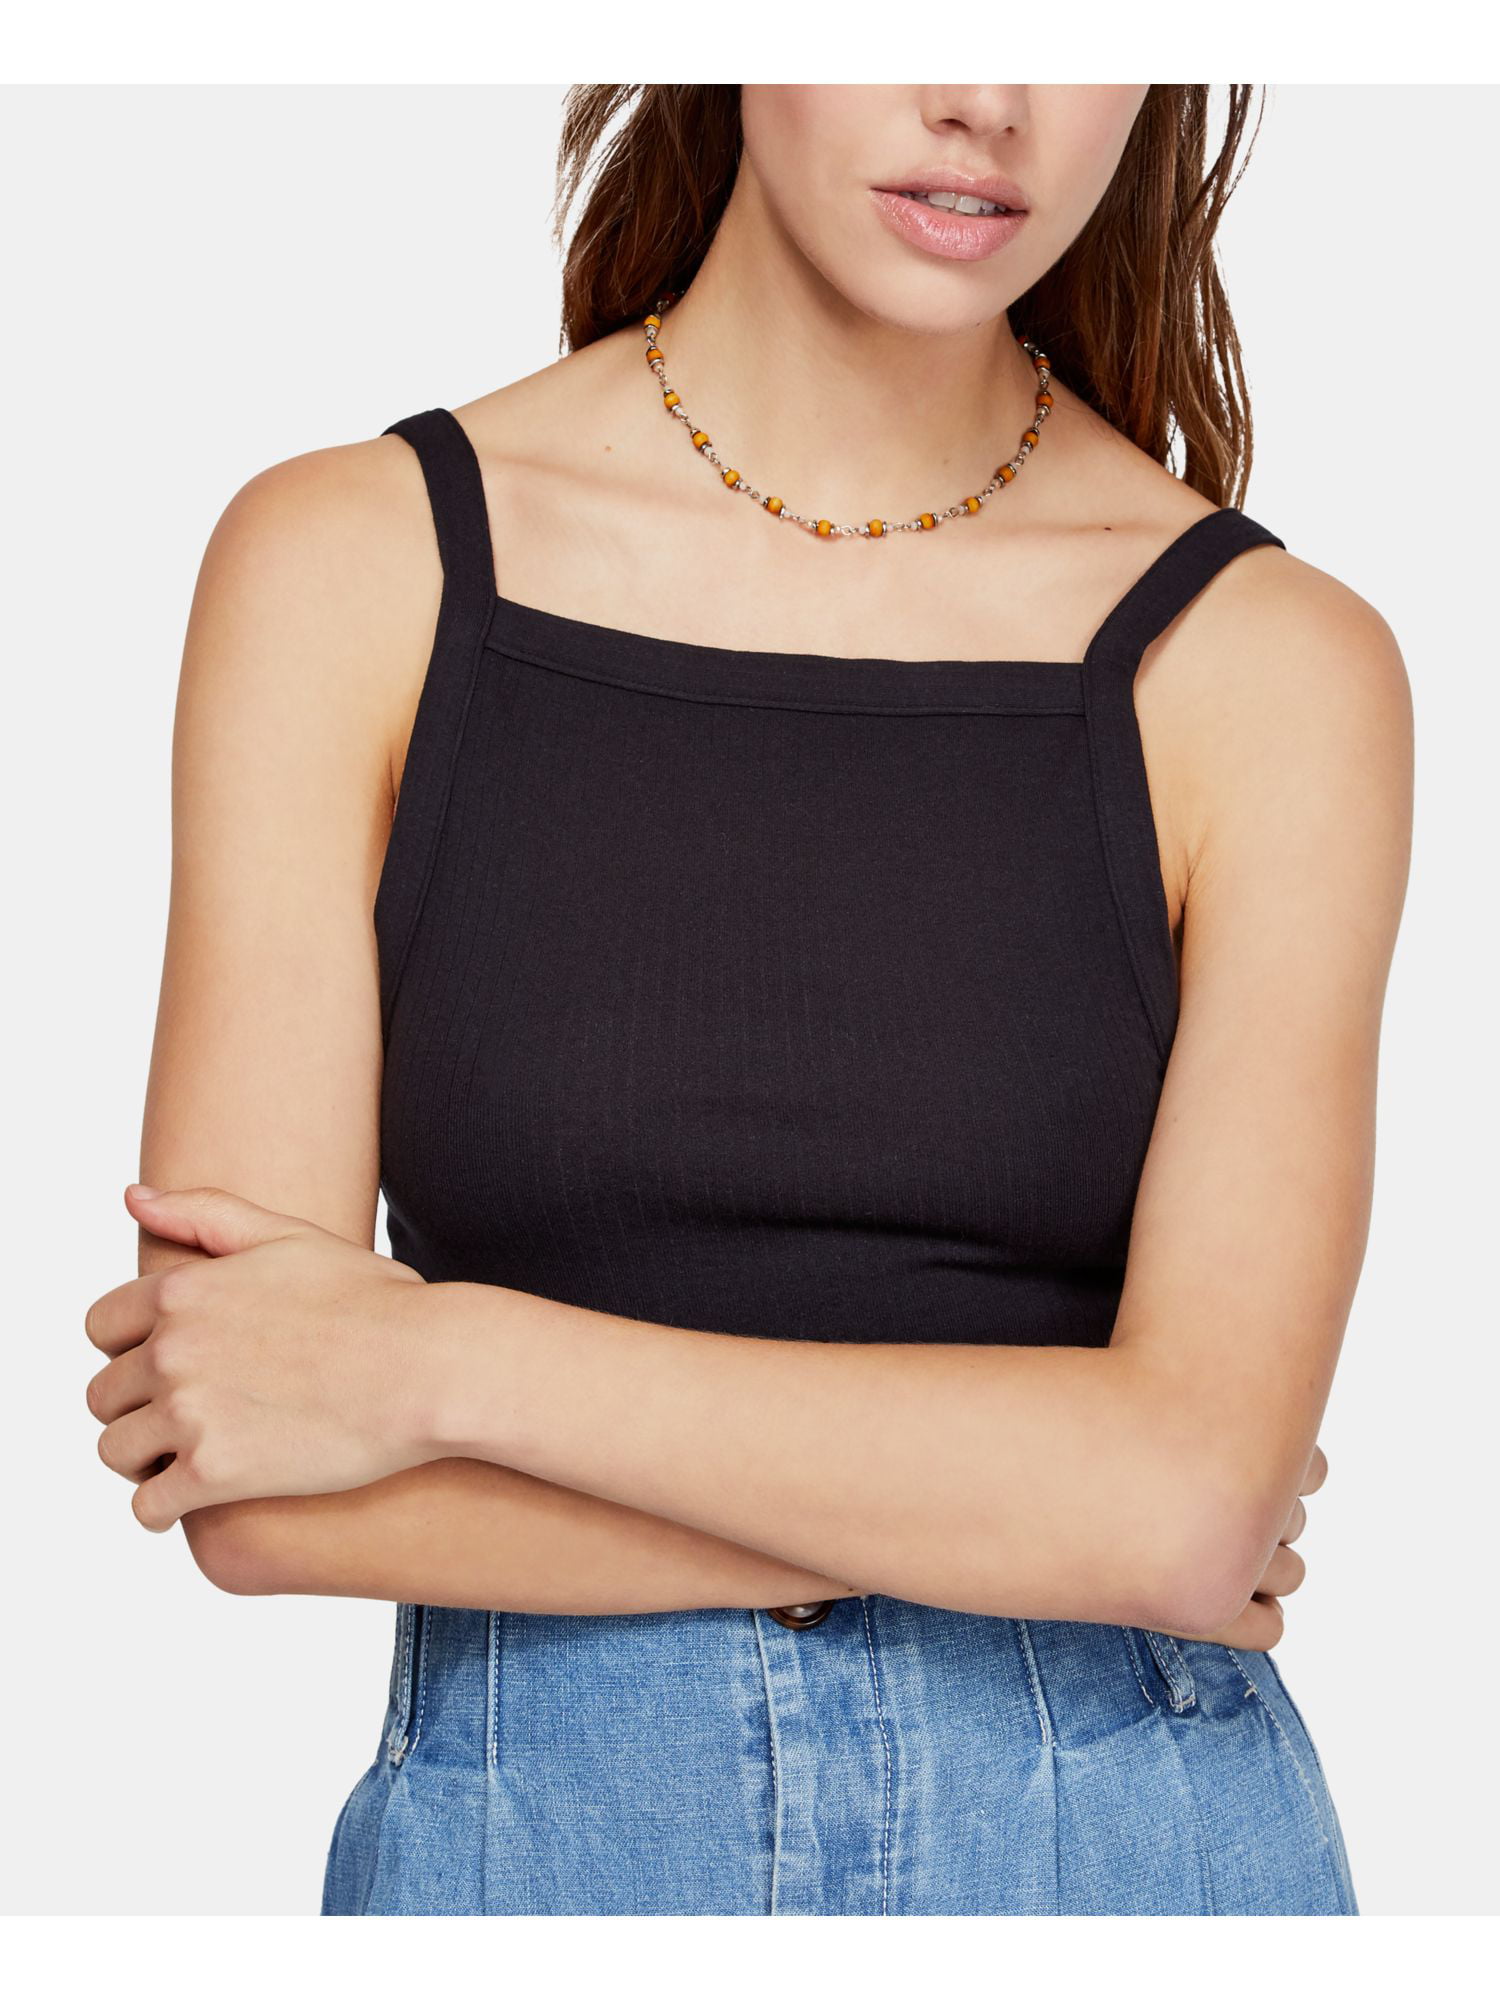 New Free People Womens Seamless Sleeveless Simple High Neck Crop Top Xs-L $20